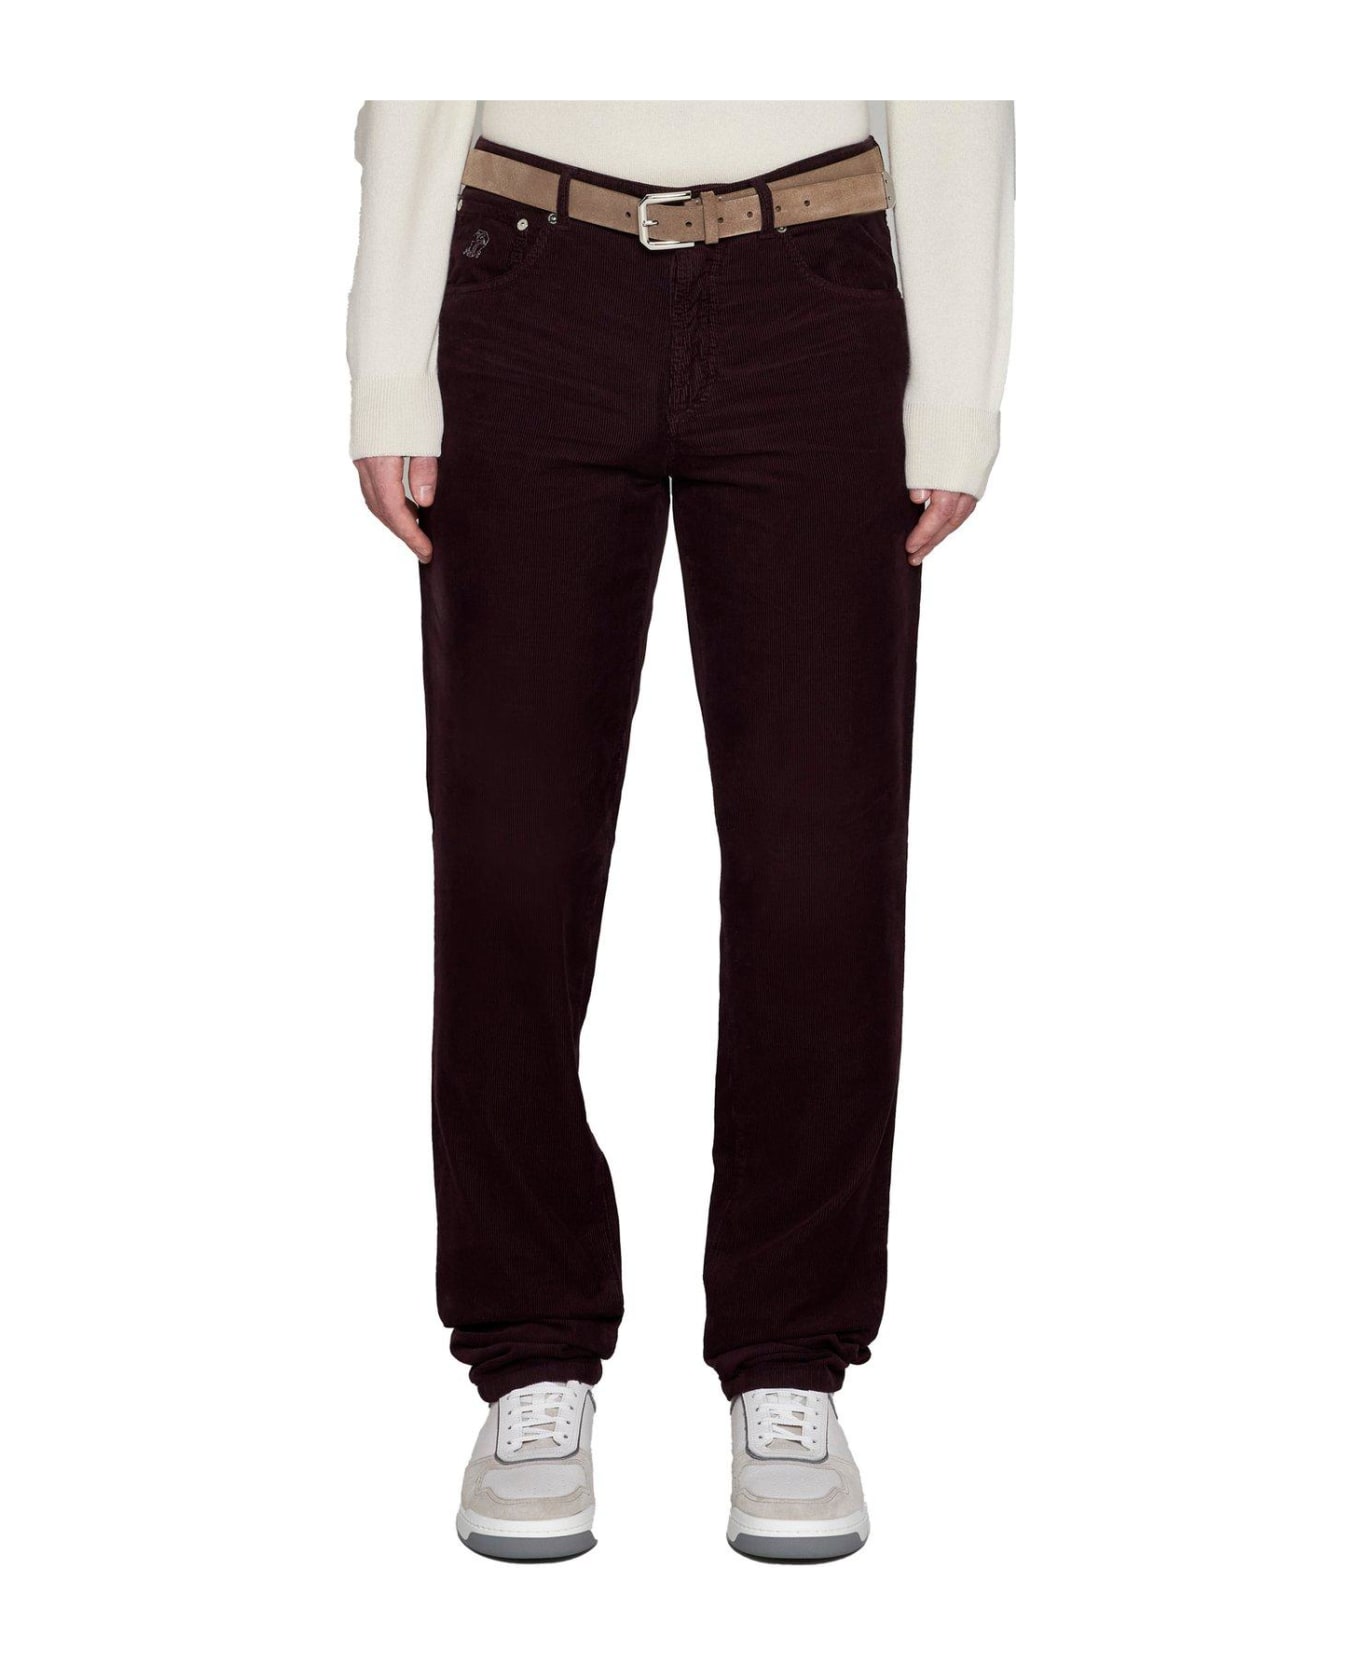 Brunello Cucinelli Logo Embroidered Cropped Corduroy Pants - Bordeaux ボトムス